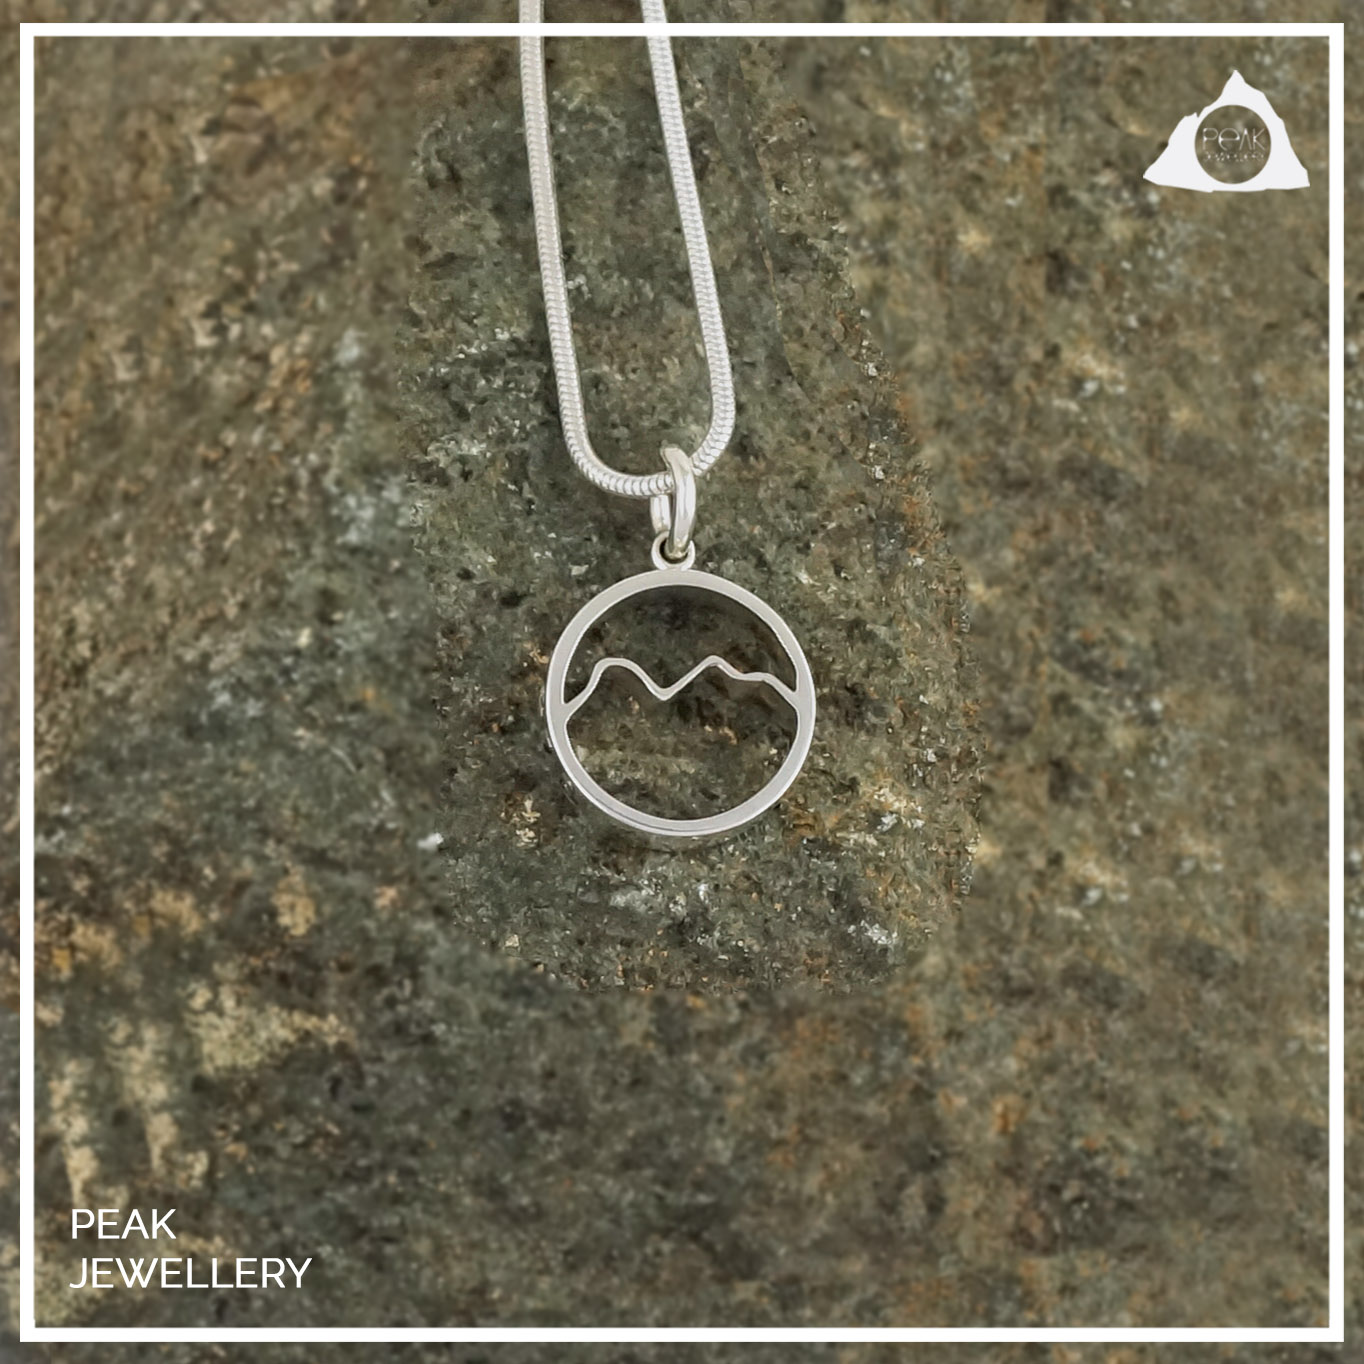 Scafell Pike Mountain Necklace Handmade Sterling Silver Mountain Pendant Necklace, Lake District - Peak Jewellery